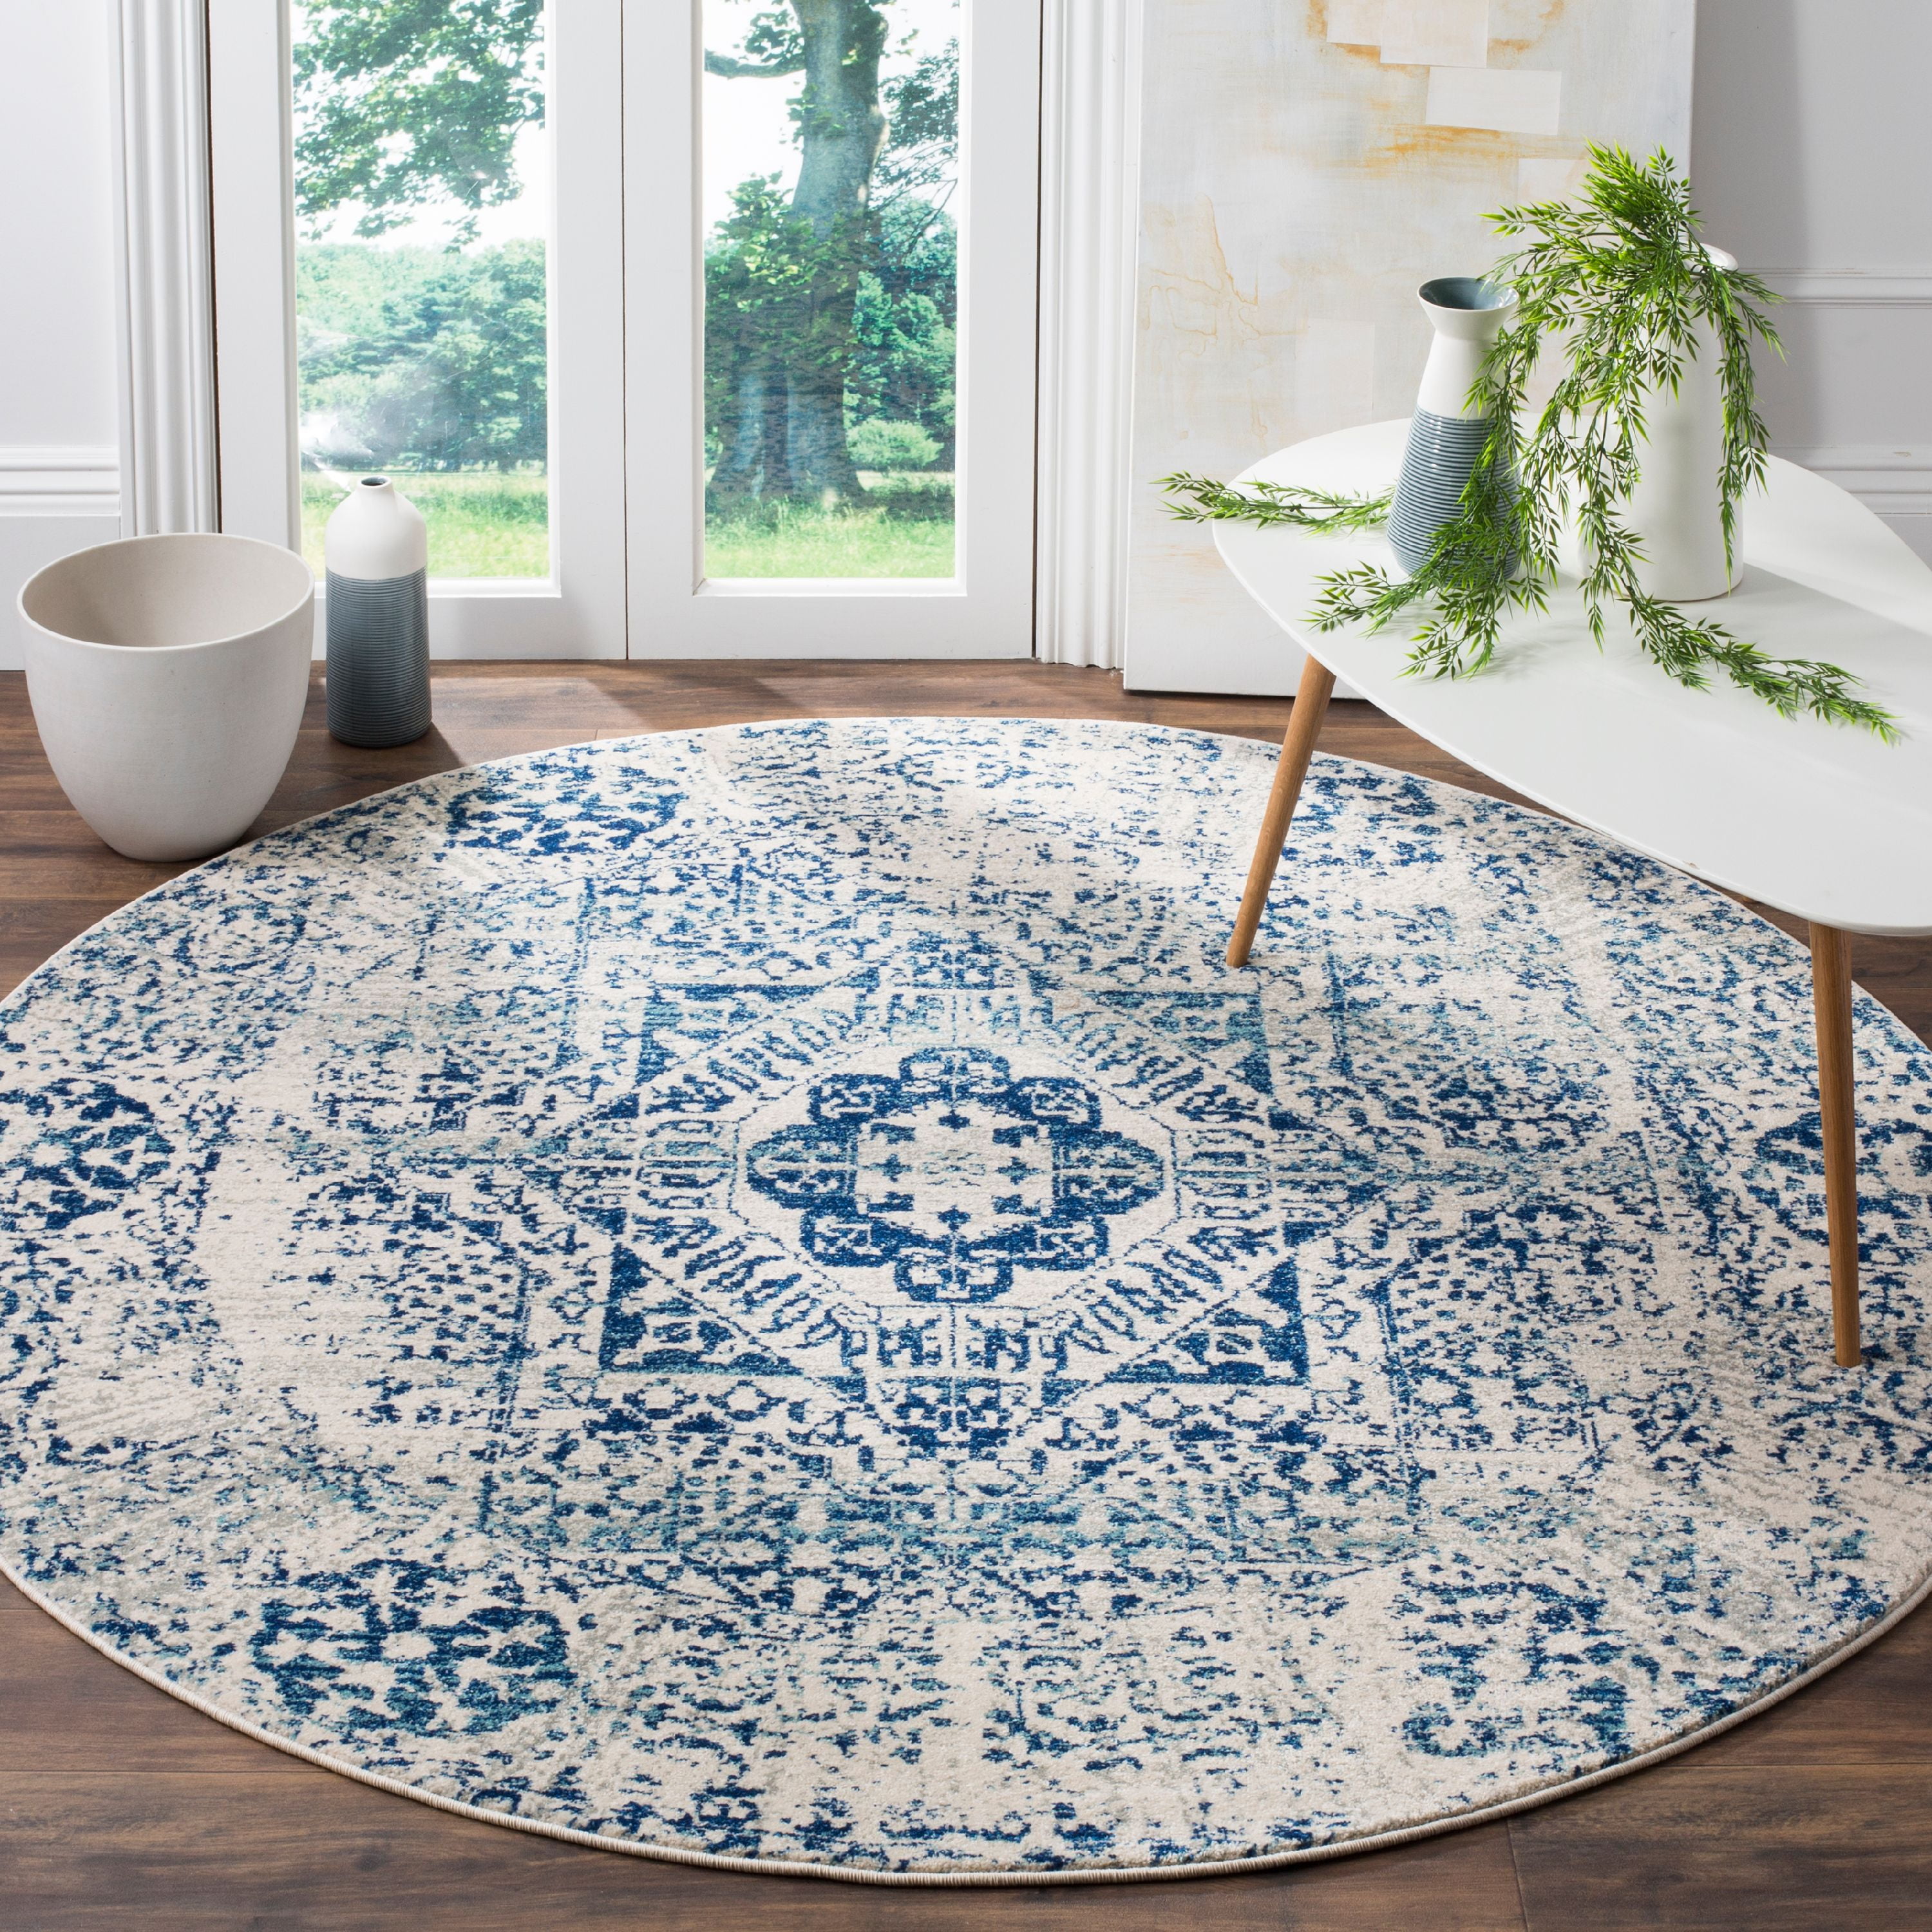 LARGE ELEGANT QUALITY THICK AREA RUGS ORIENTAL HERITAGE CIRCLE ROUND RUNNER SALE 